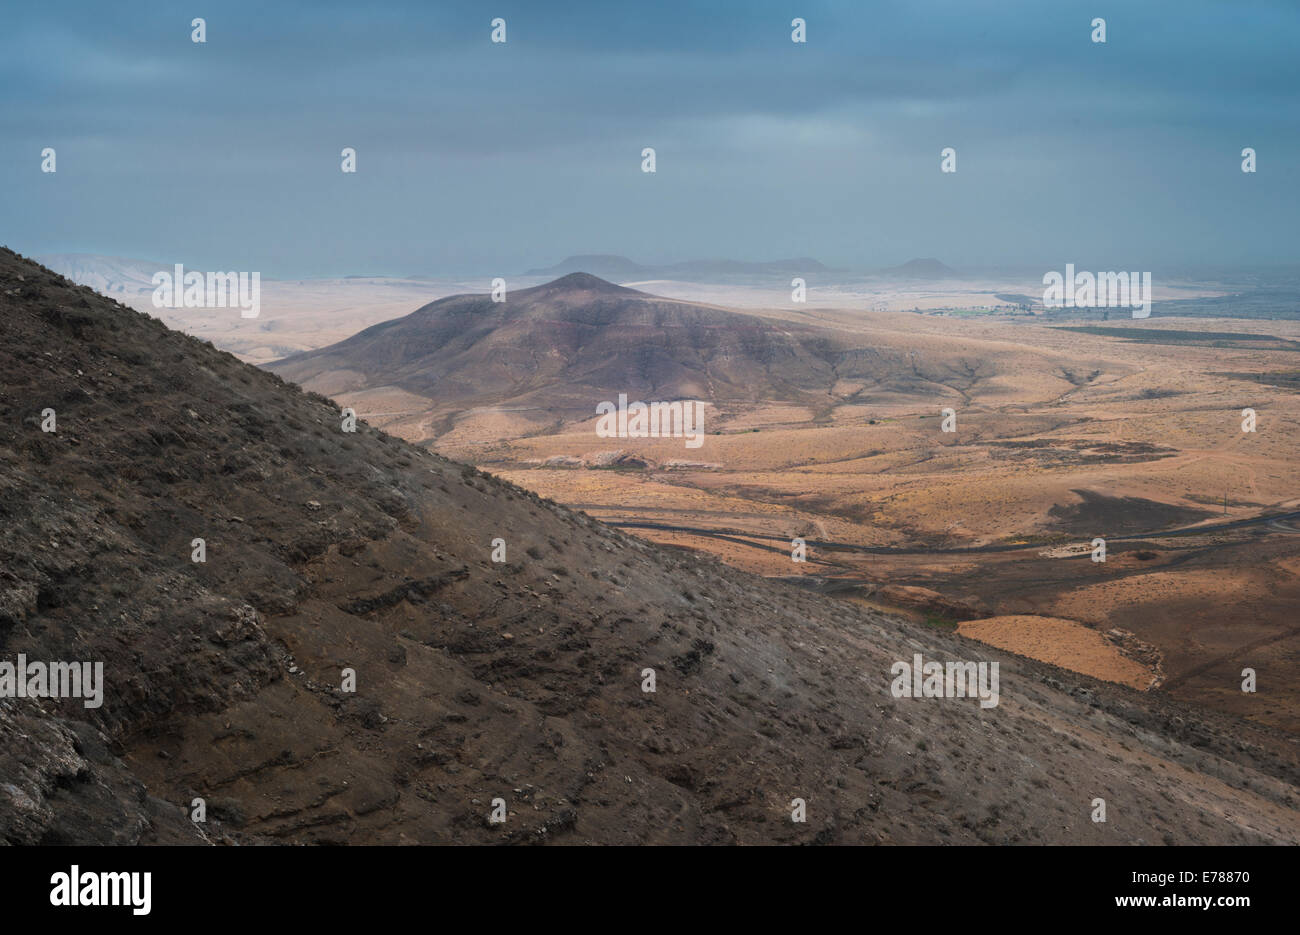 View over the arid landscape of north-western Fuerteventura, Canary Islands, from Mirador de Tababaire Stock Photo